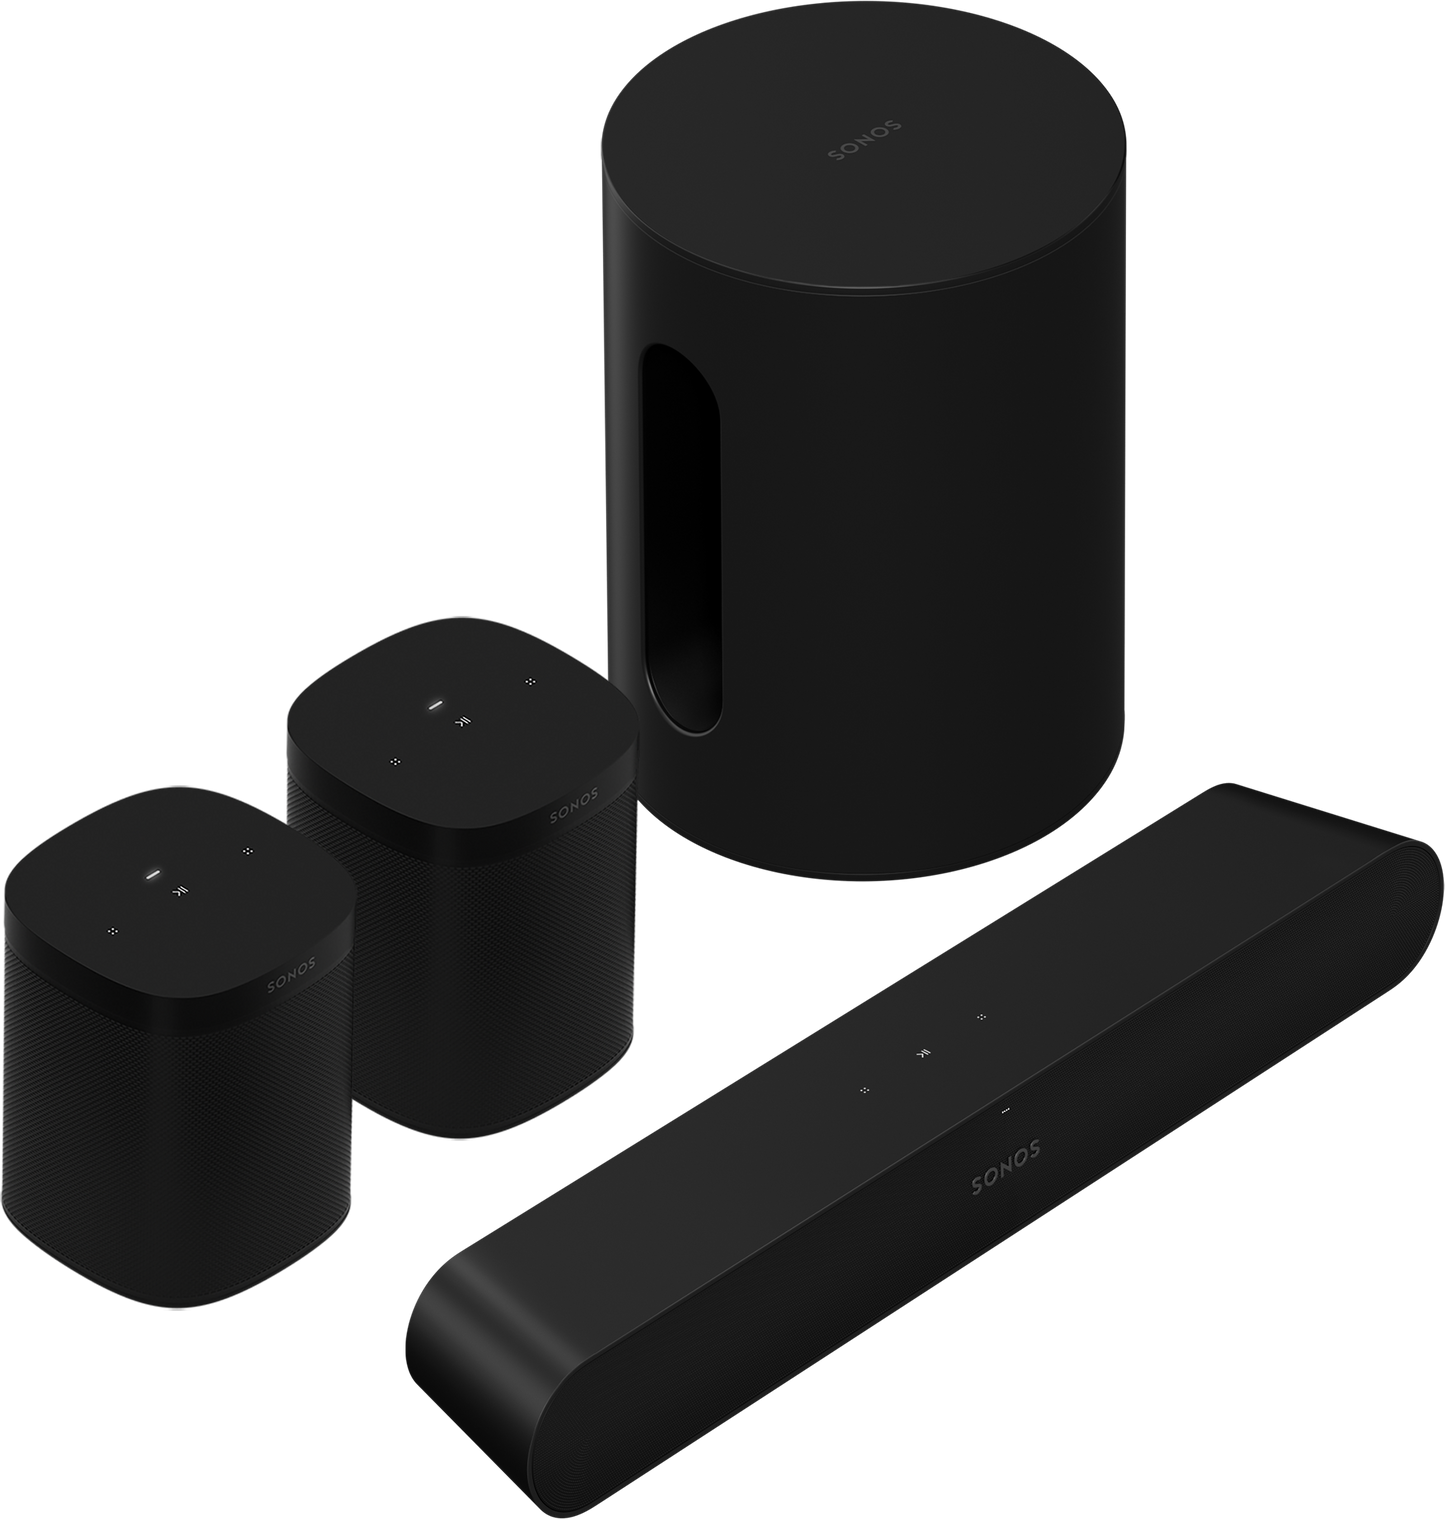 SONOS Immersive Set with Sub mini, Ray and One SL - Black